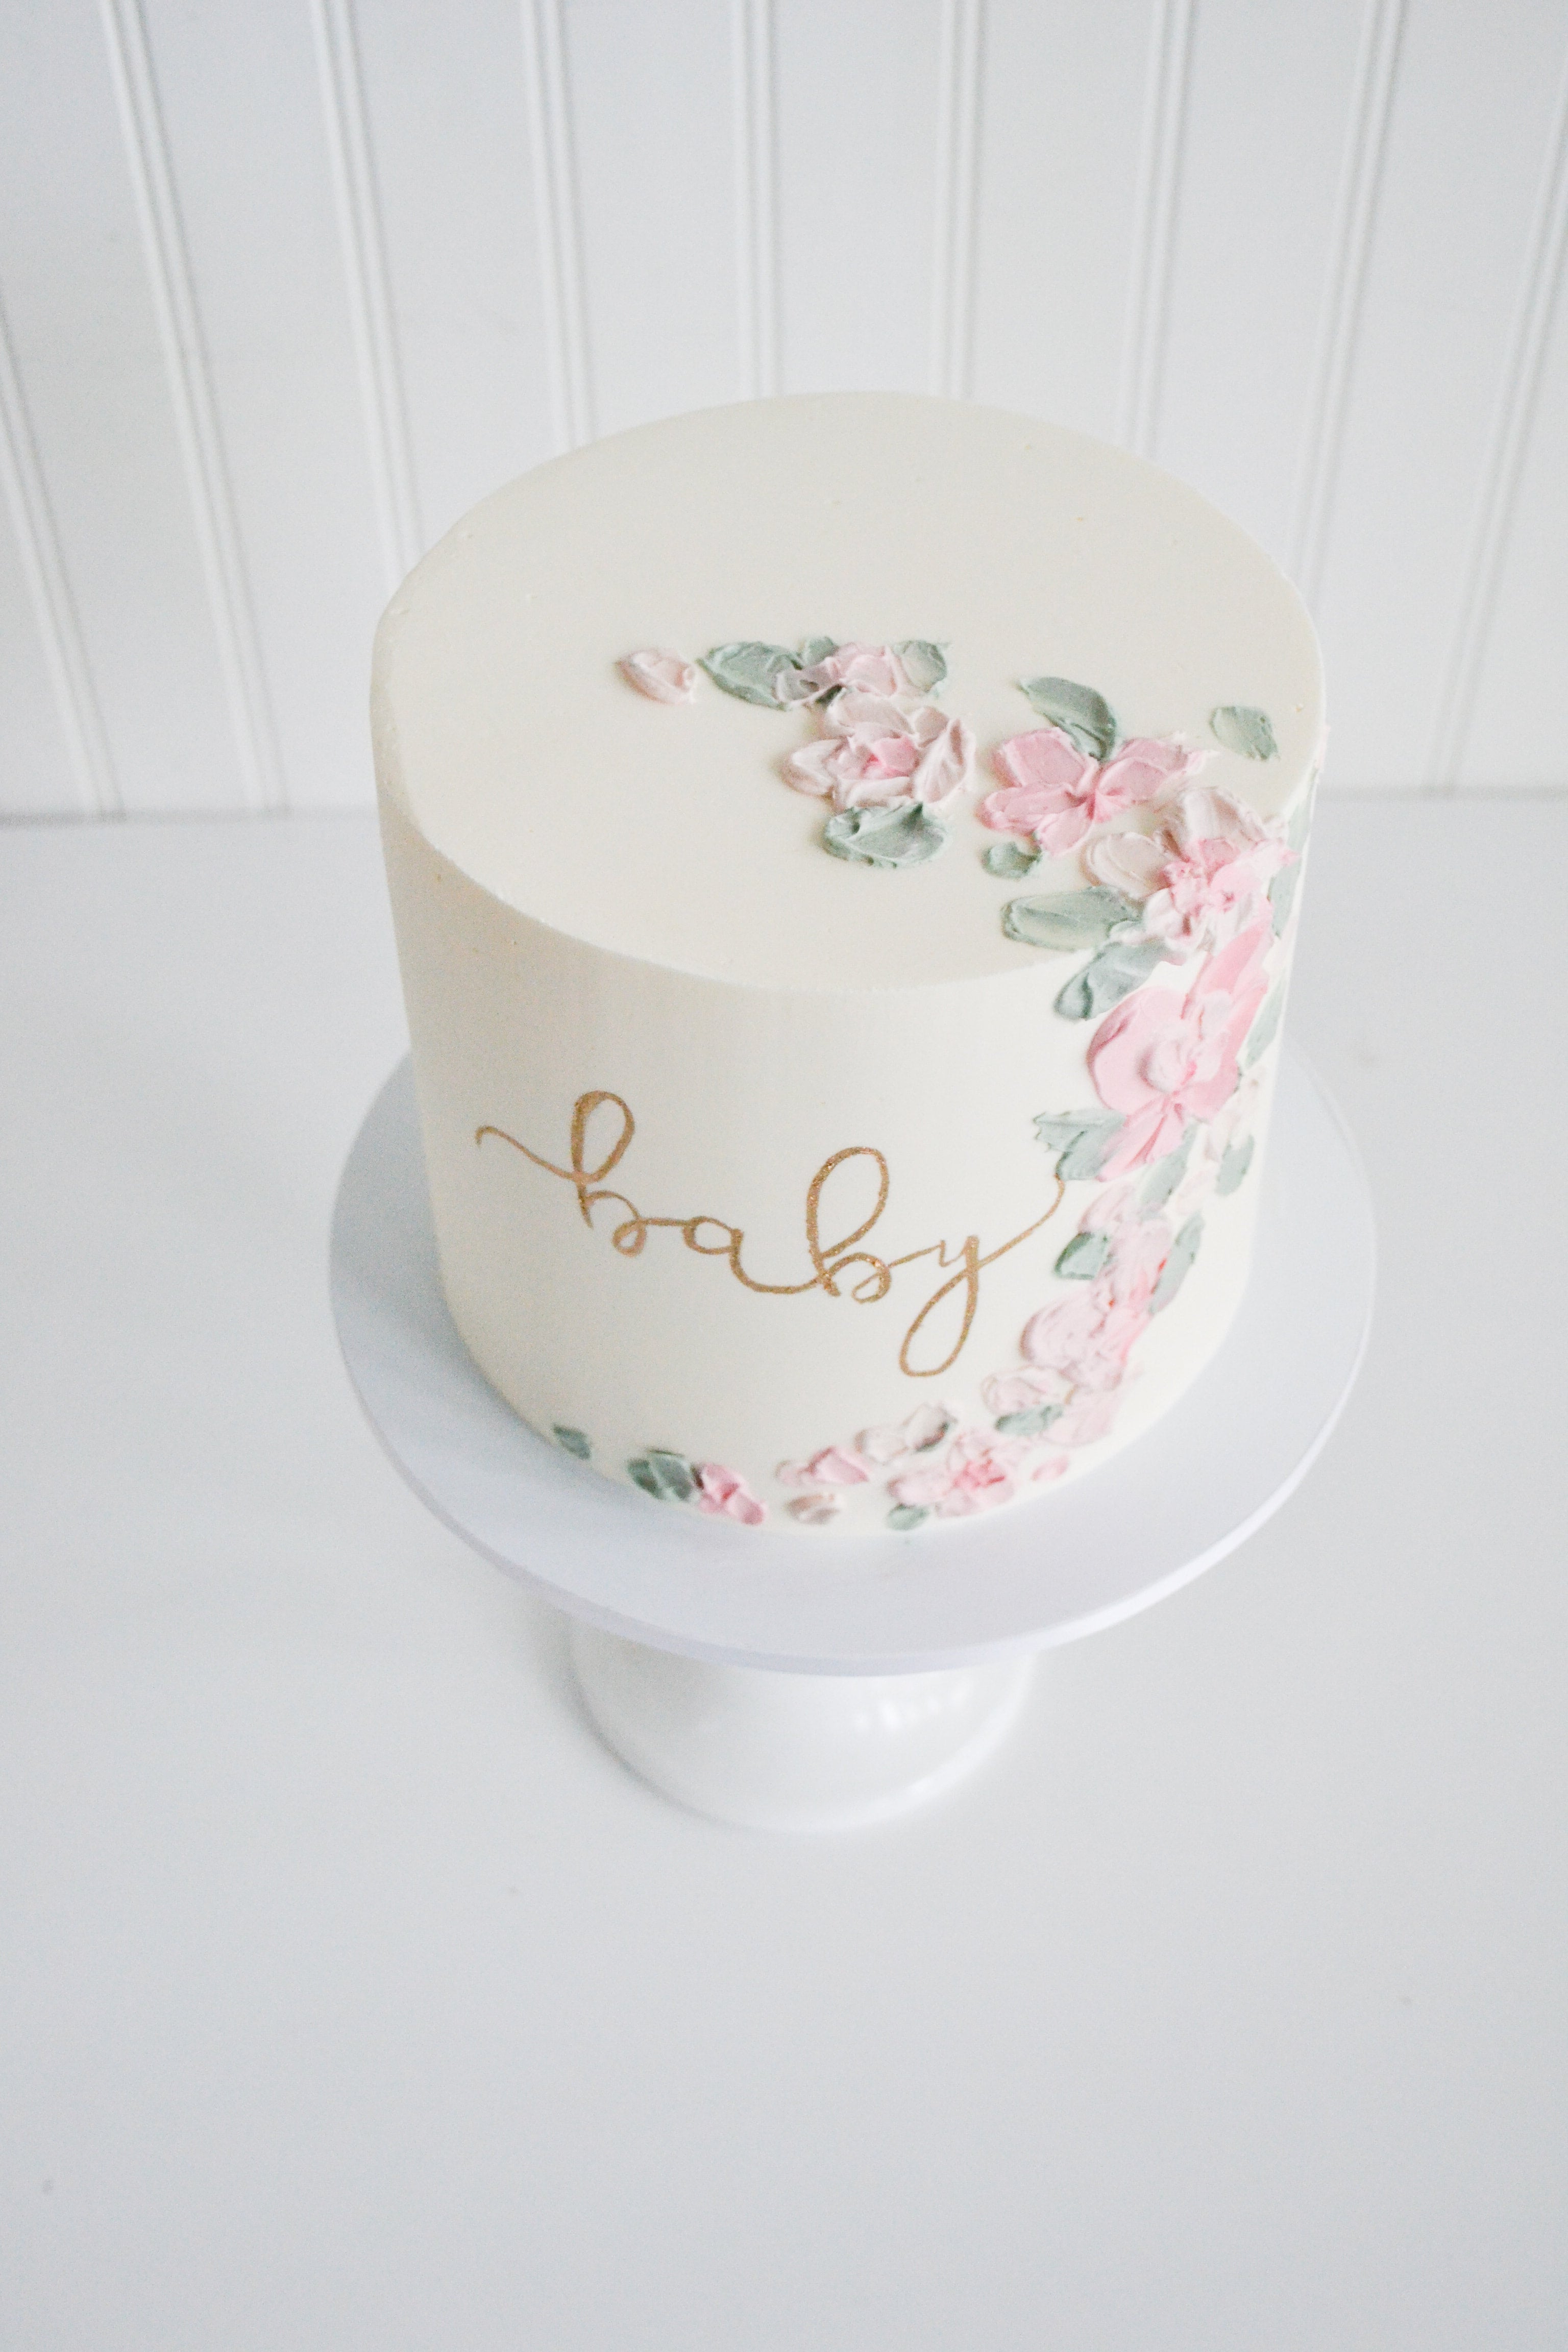 Shabby Chic Floral Cake